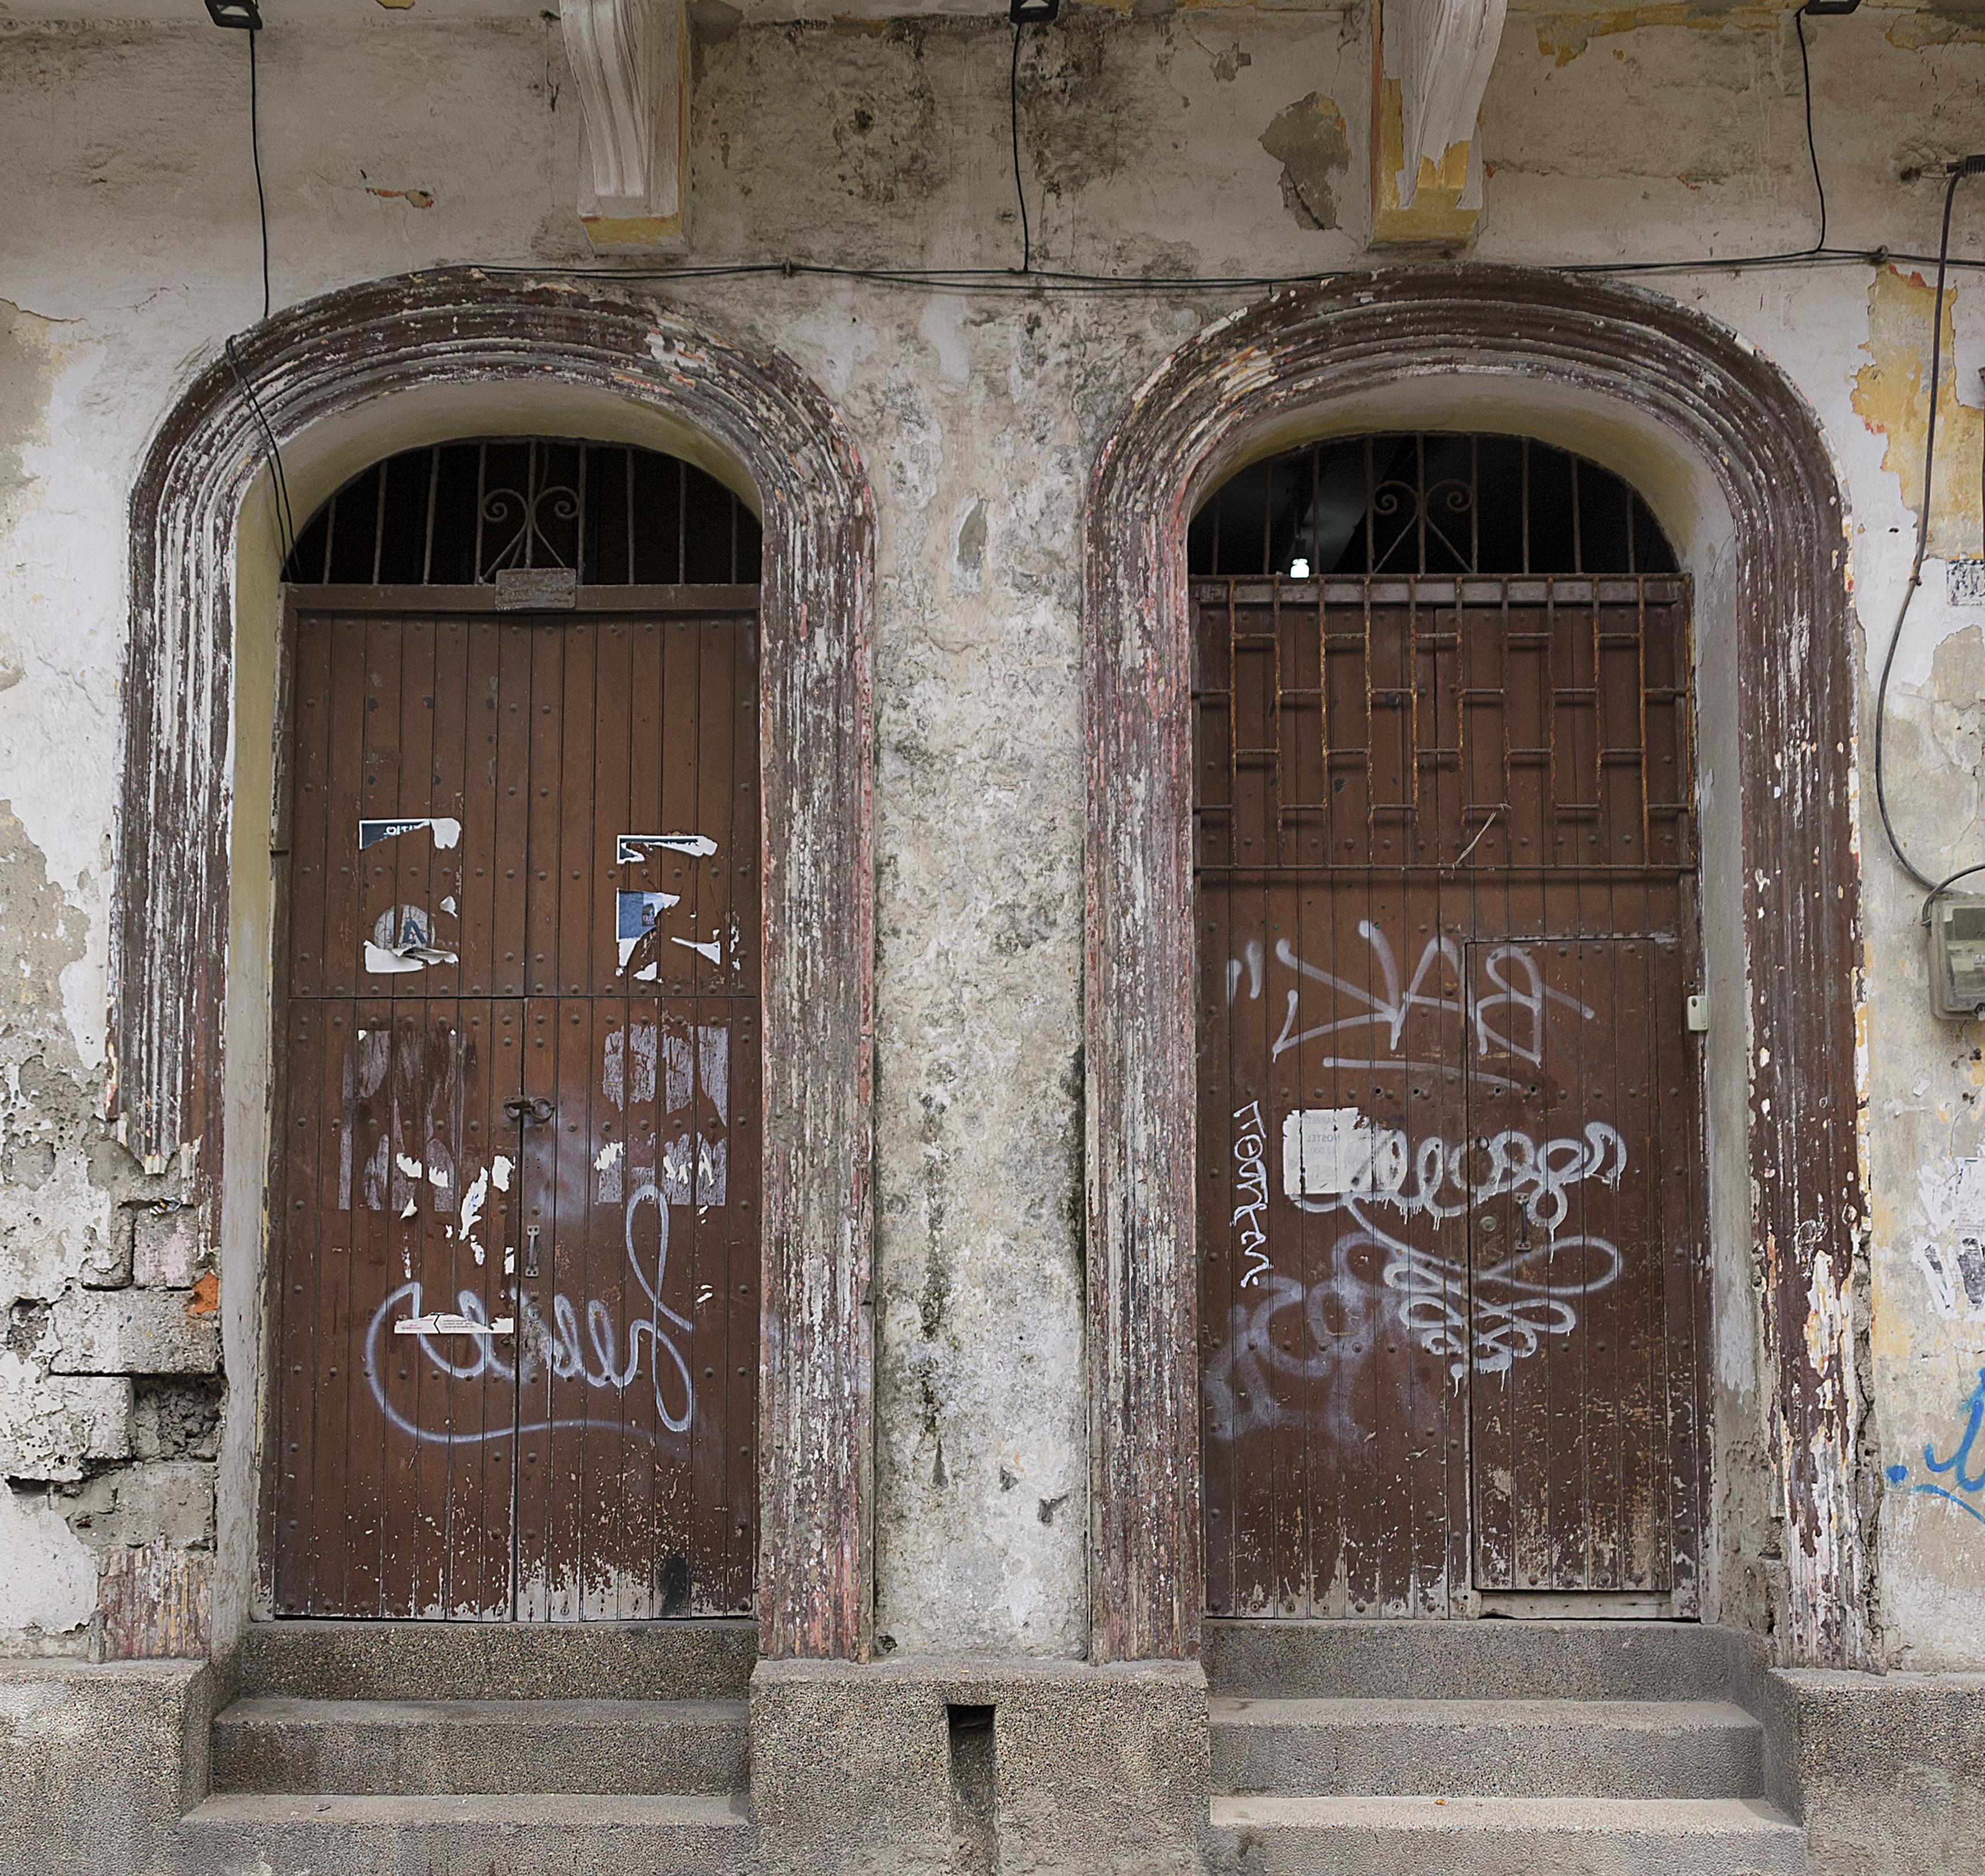 Free picture: architecture, front door, house, old, abandoned, wall ...